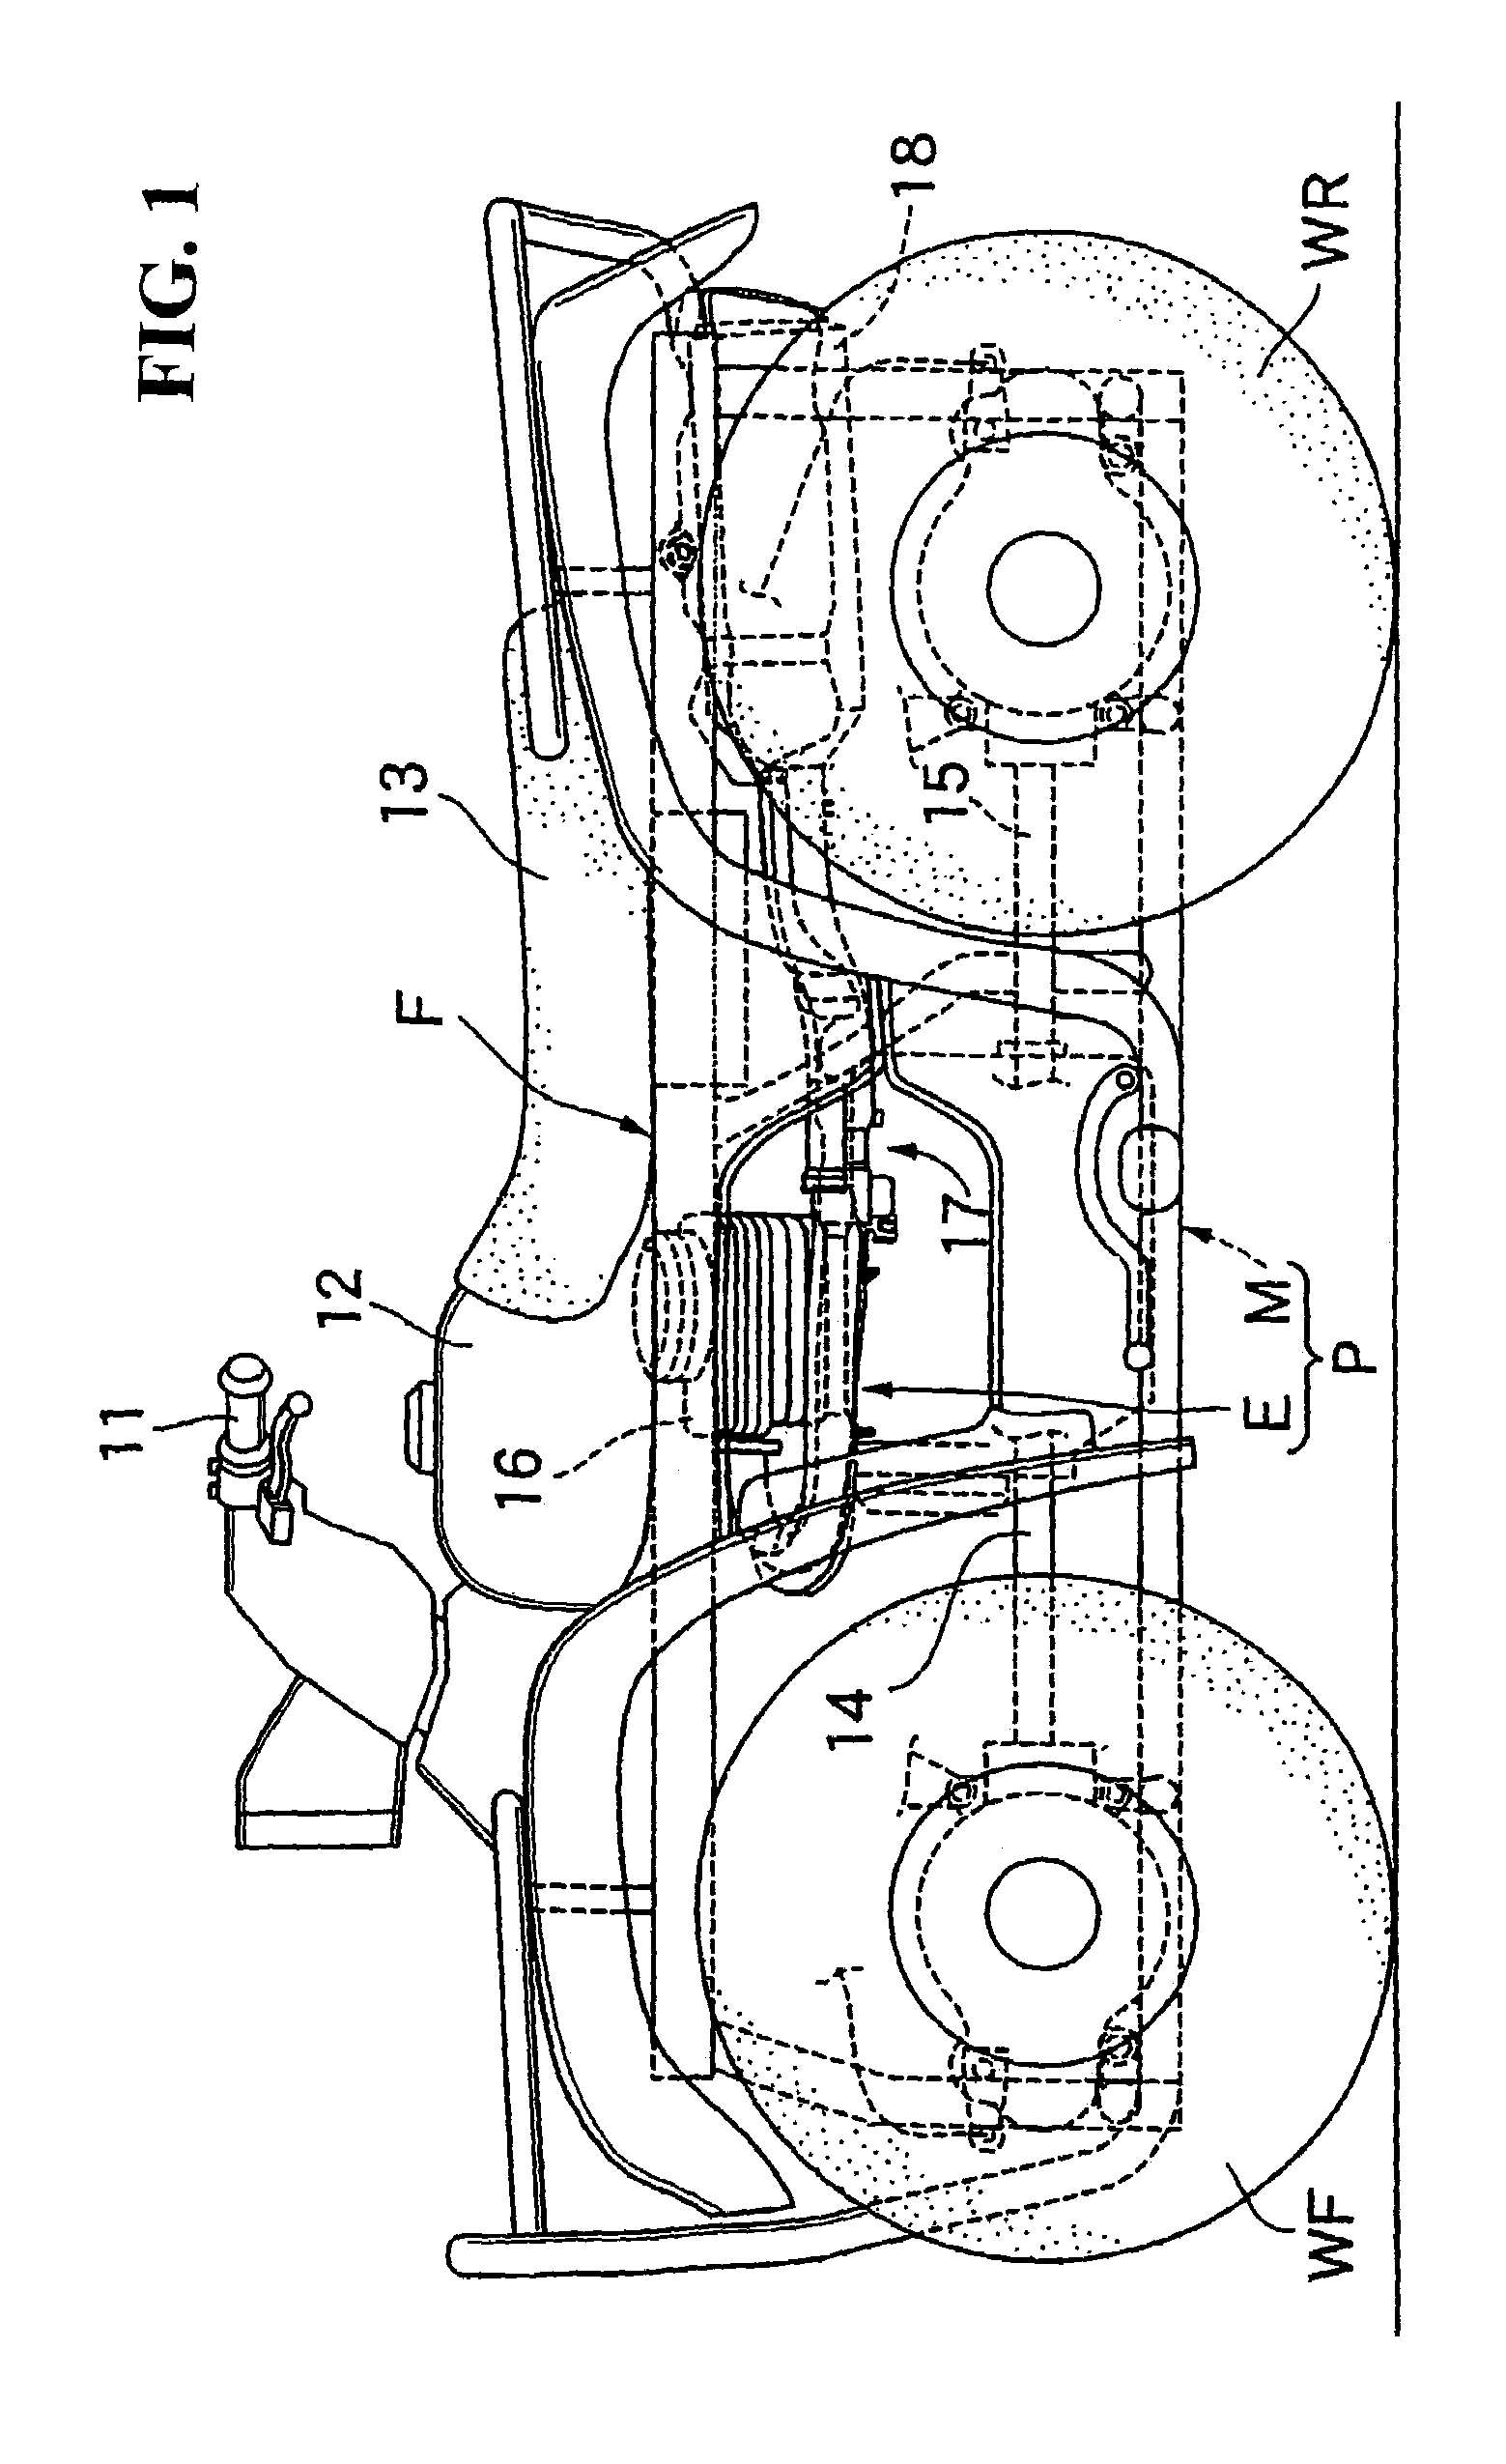 Exhaust device for vehicle engine